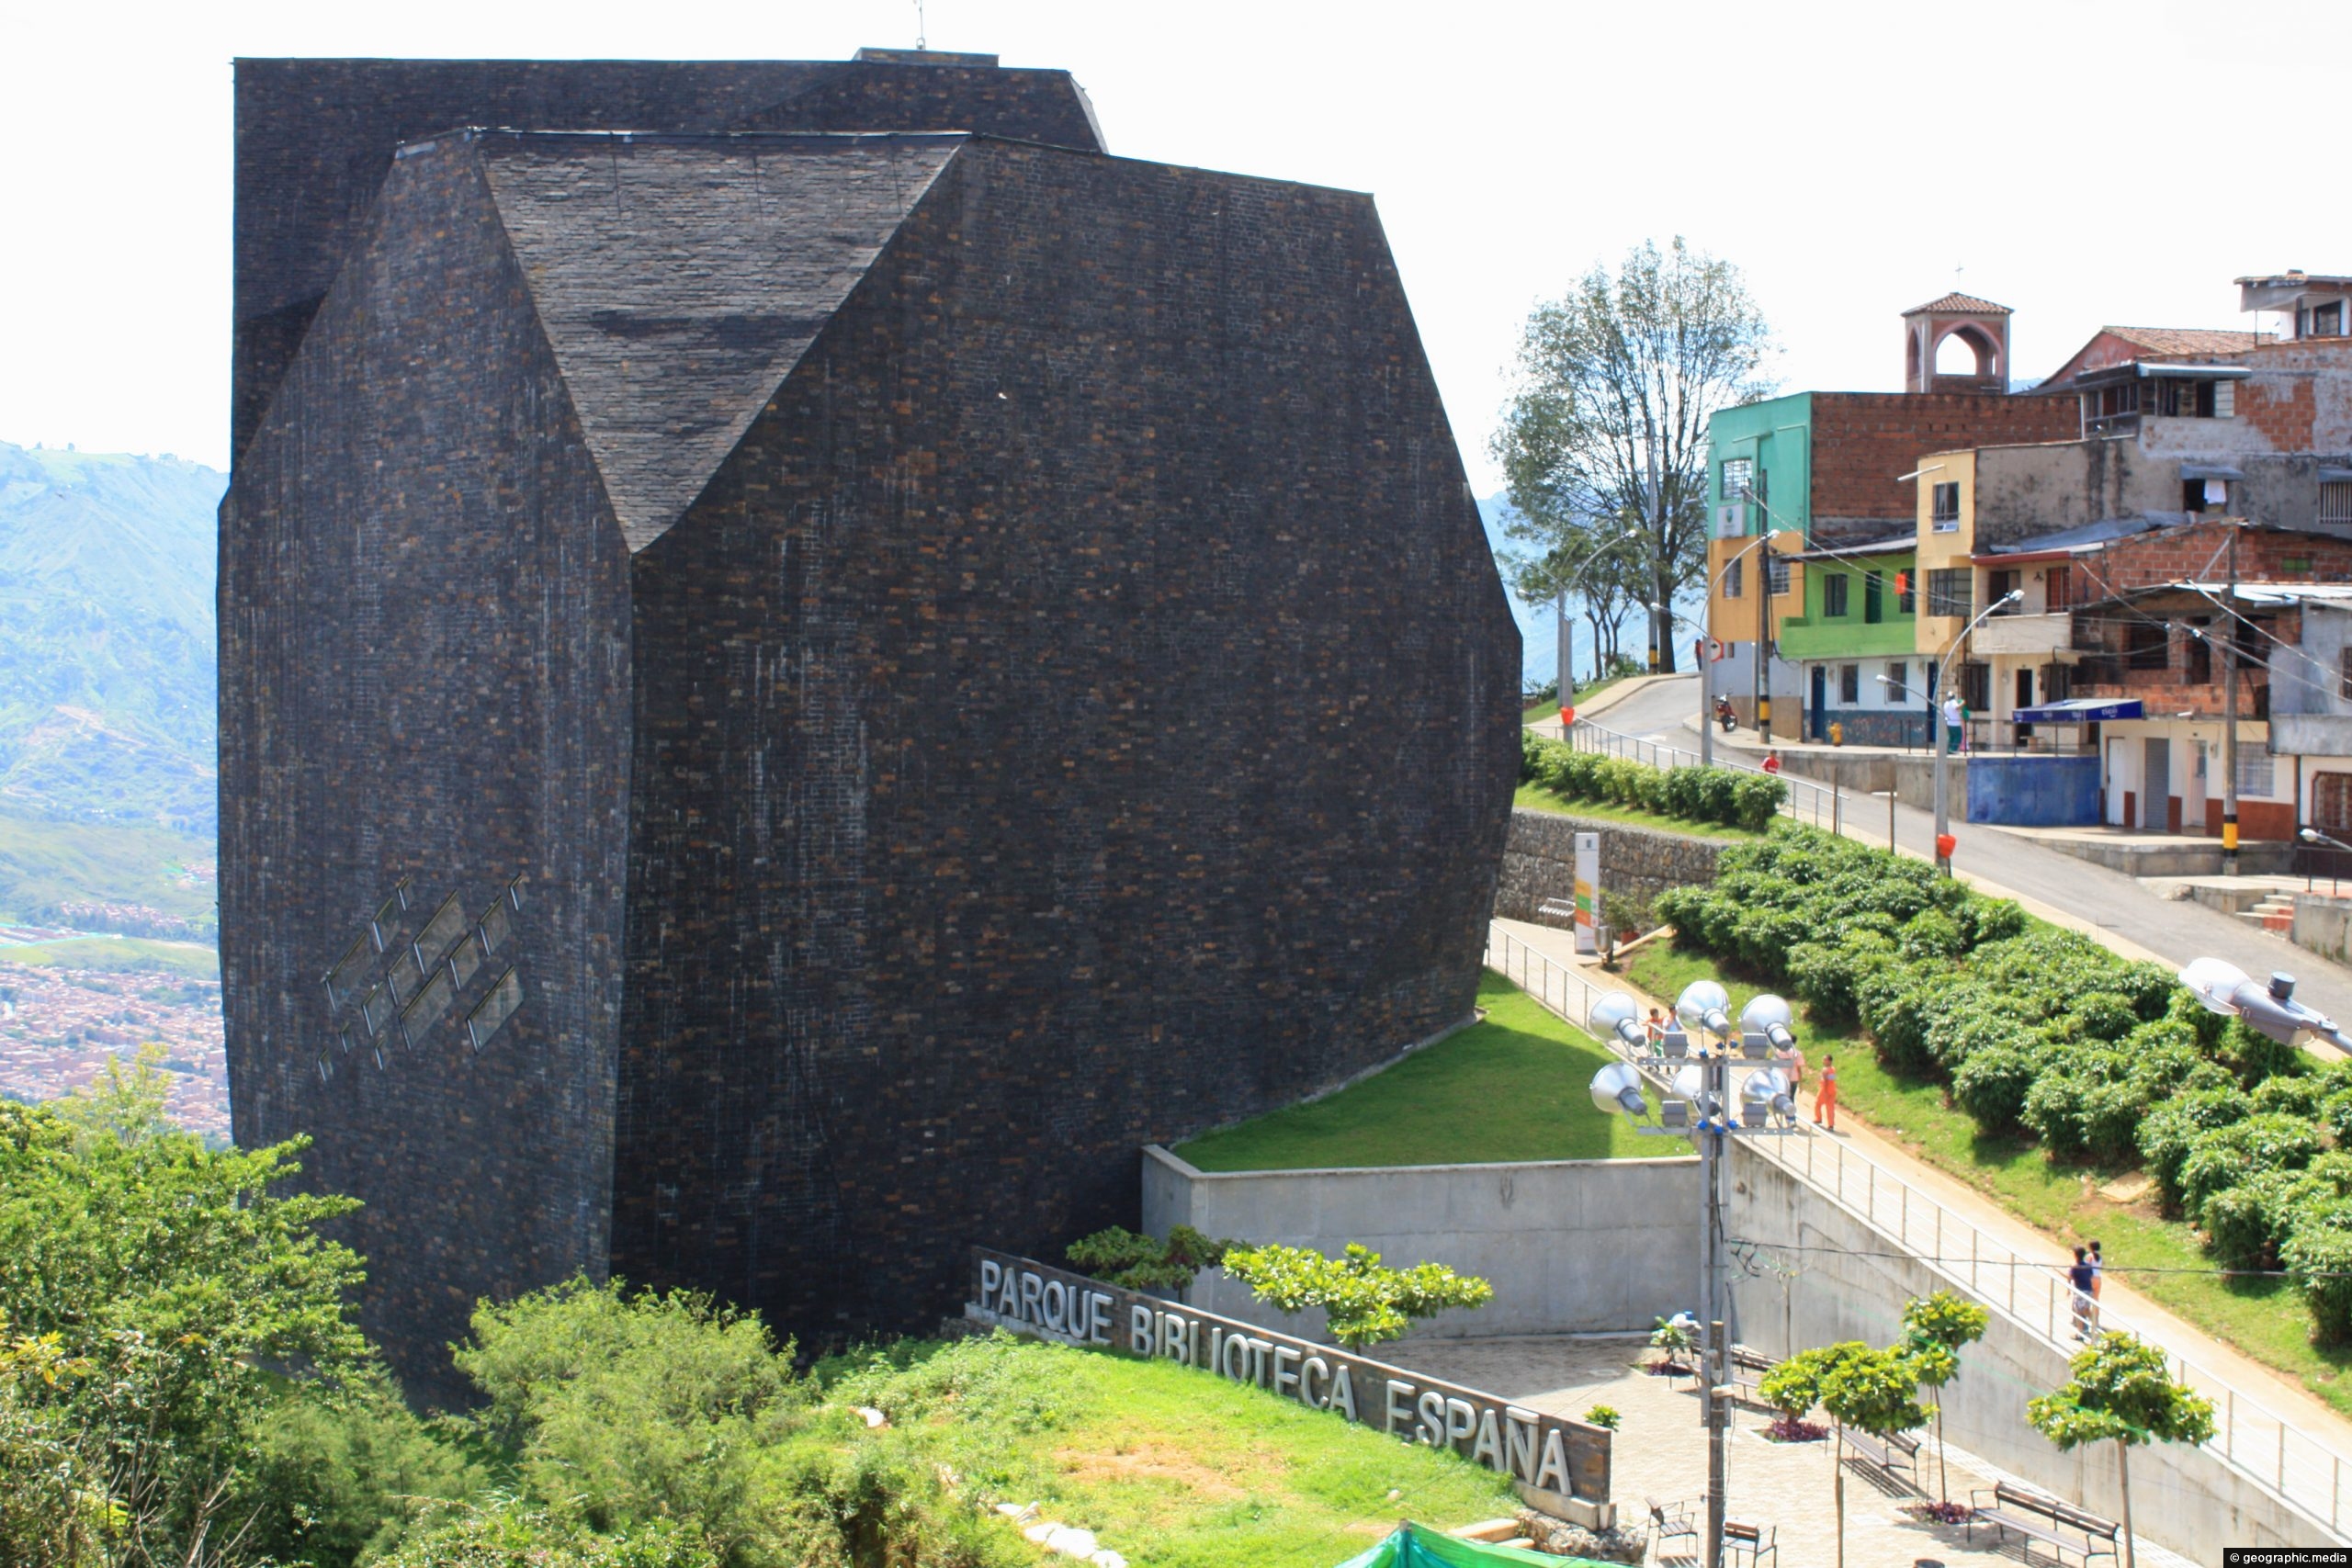 Library of Spain in Medellin Colombia